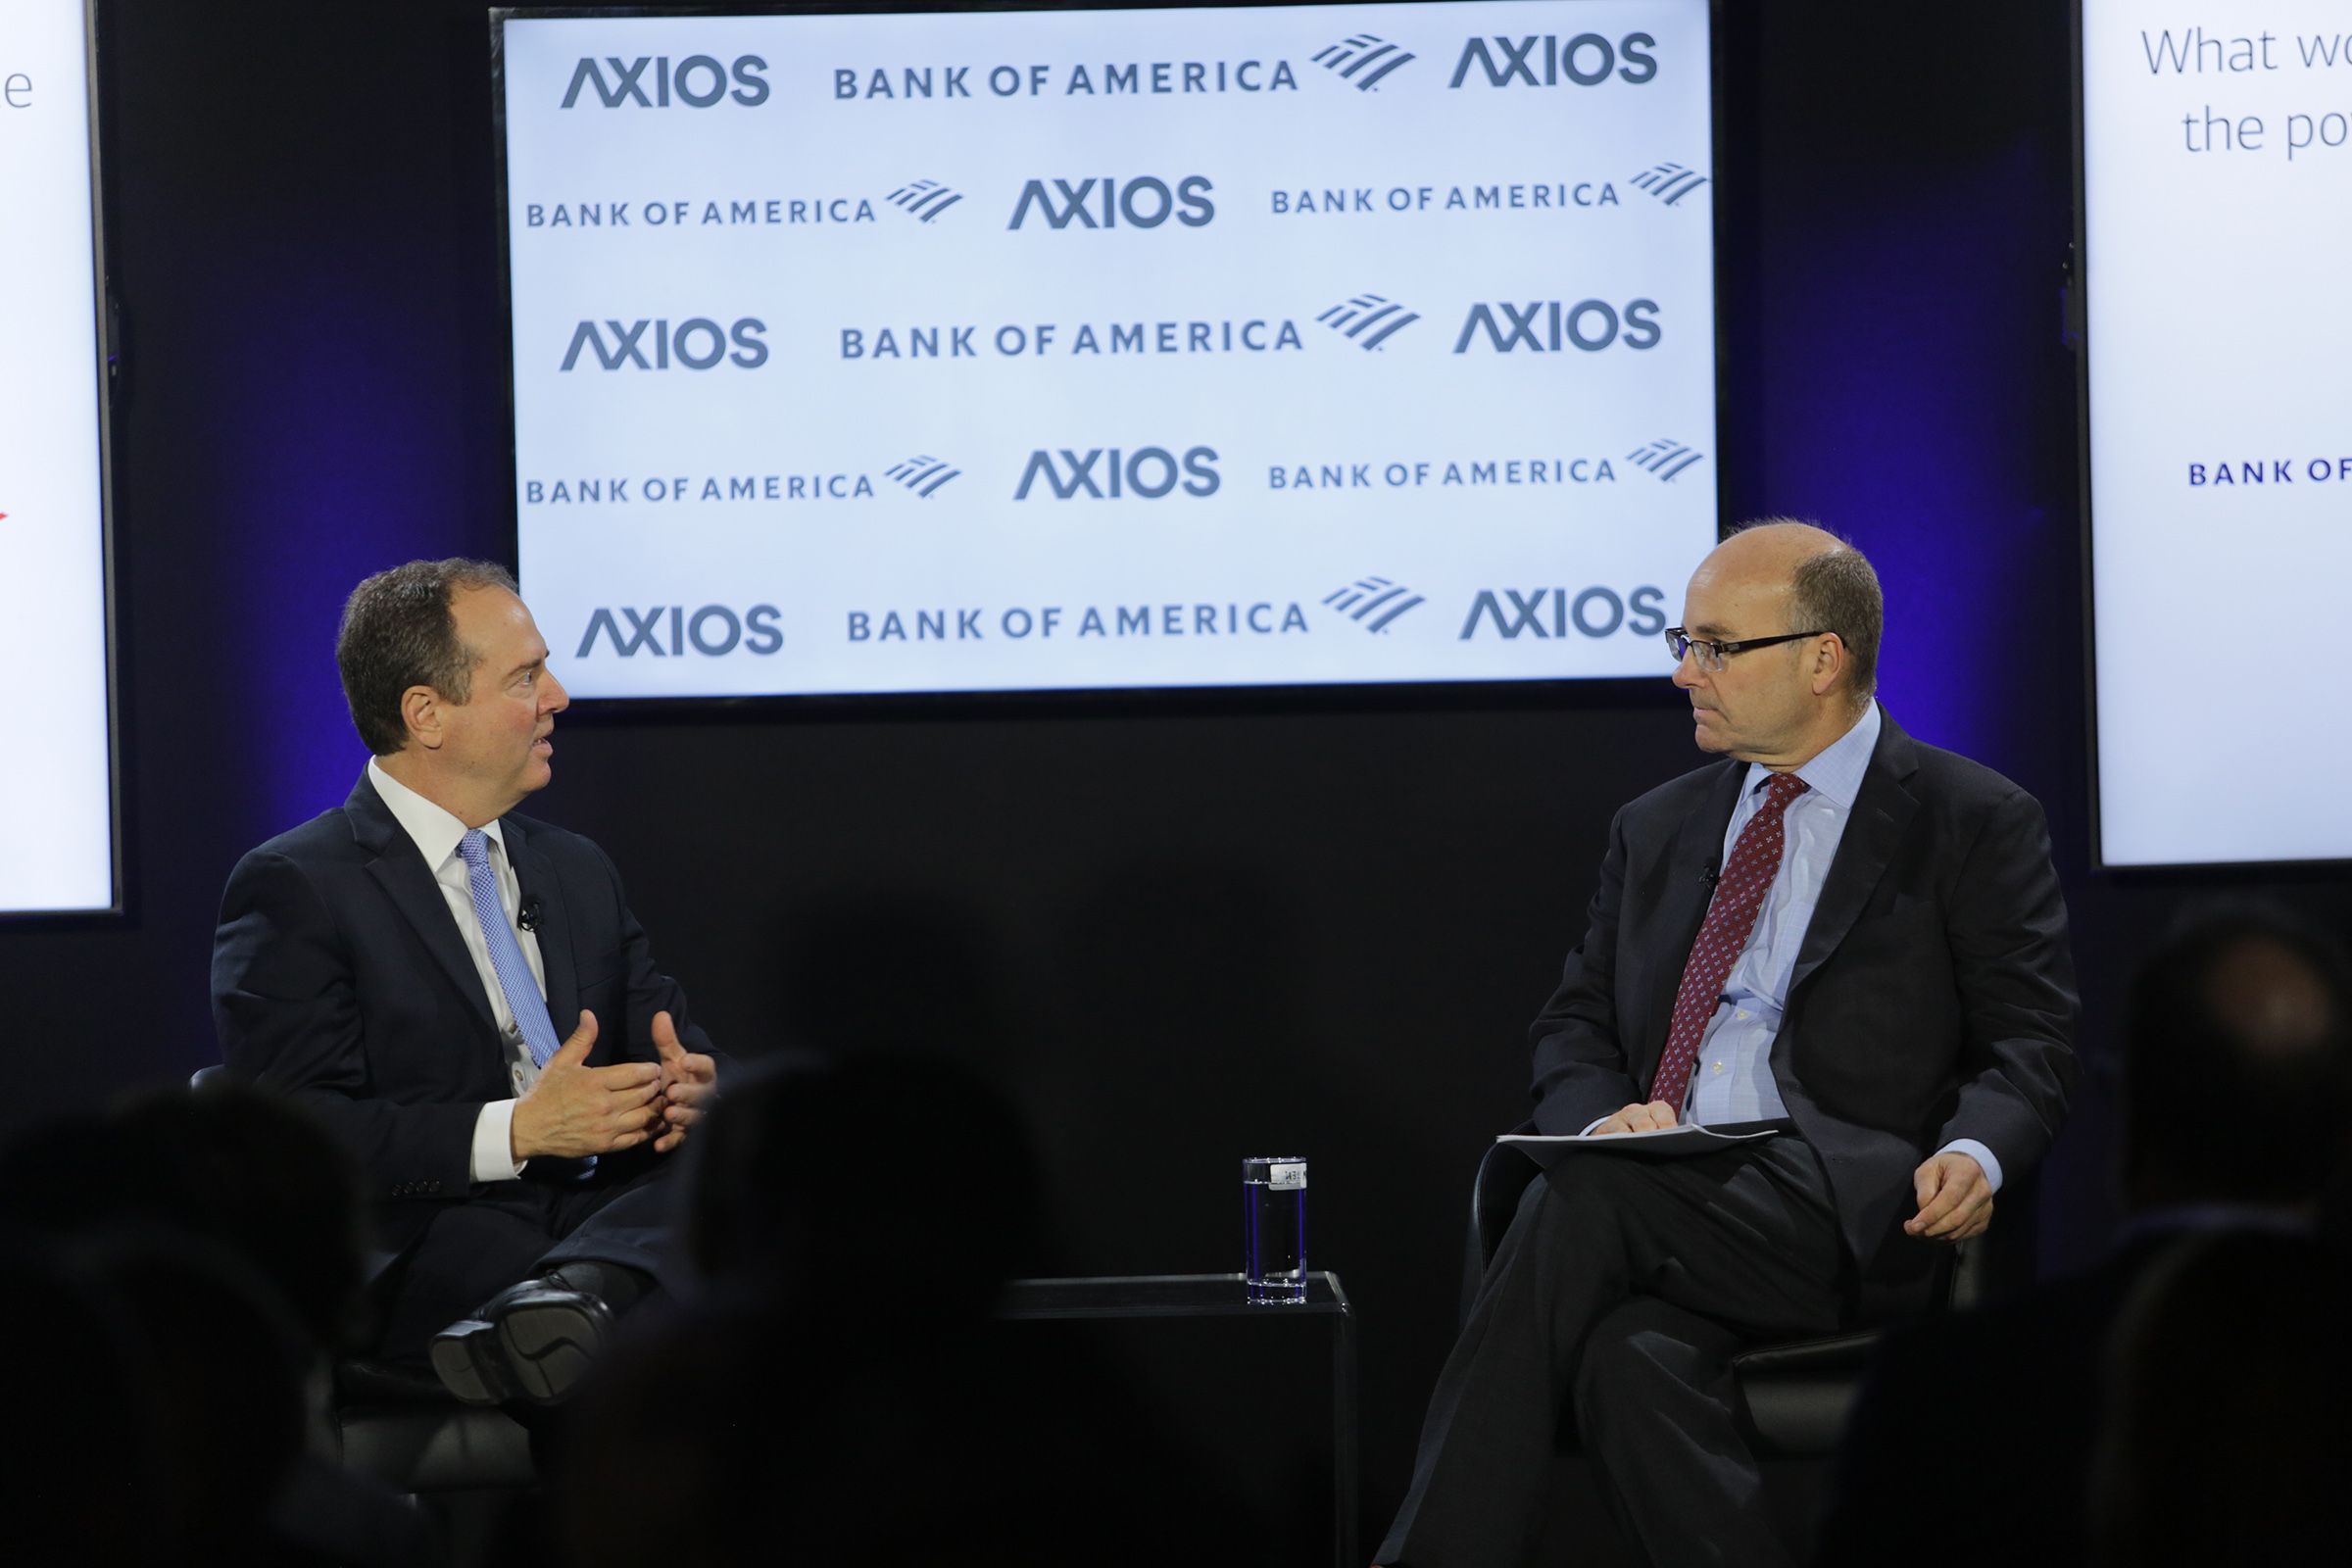 Rep. Adam Schiff and Mike Allen speaking on the Axios stage for News Shapers event.